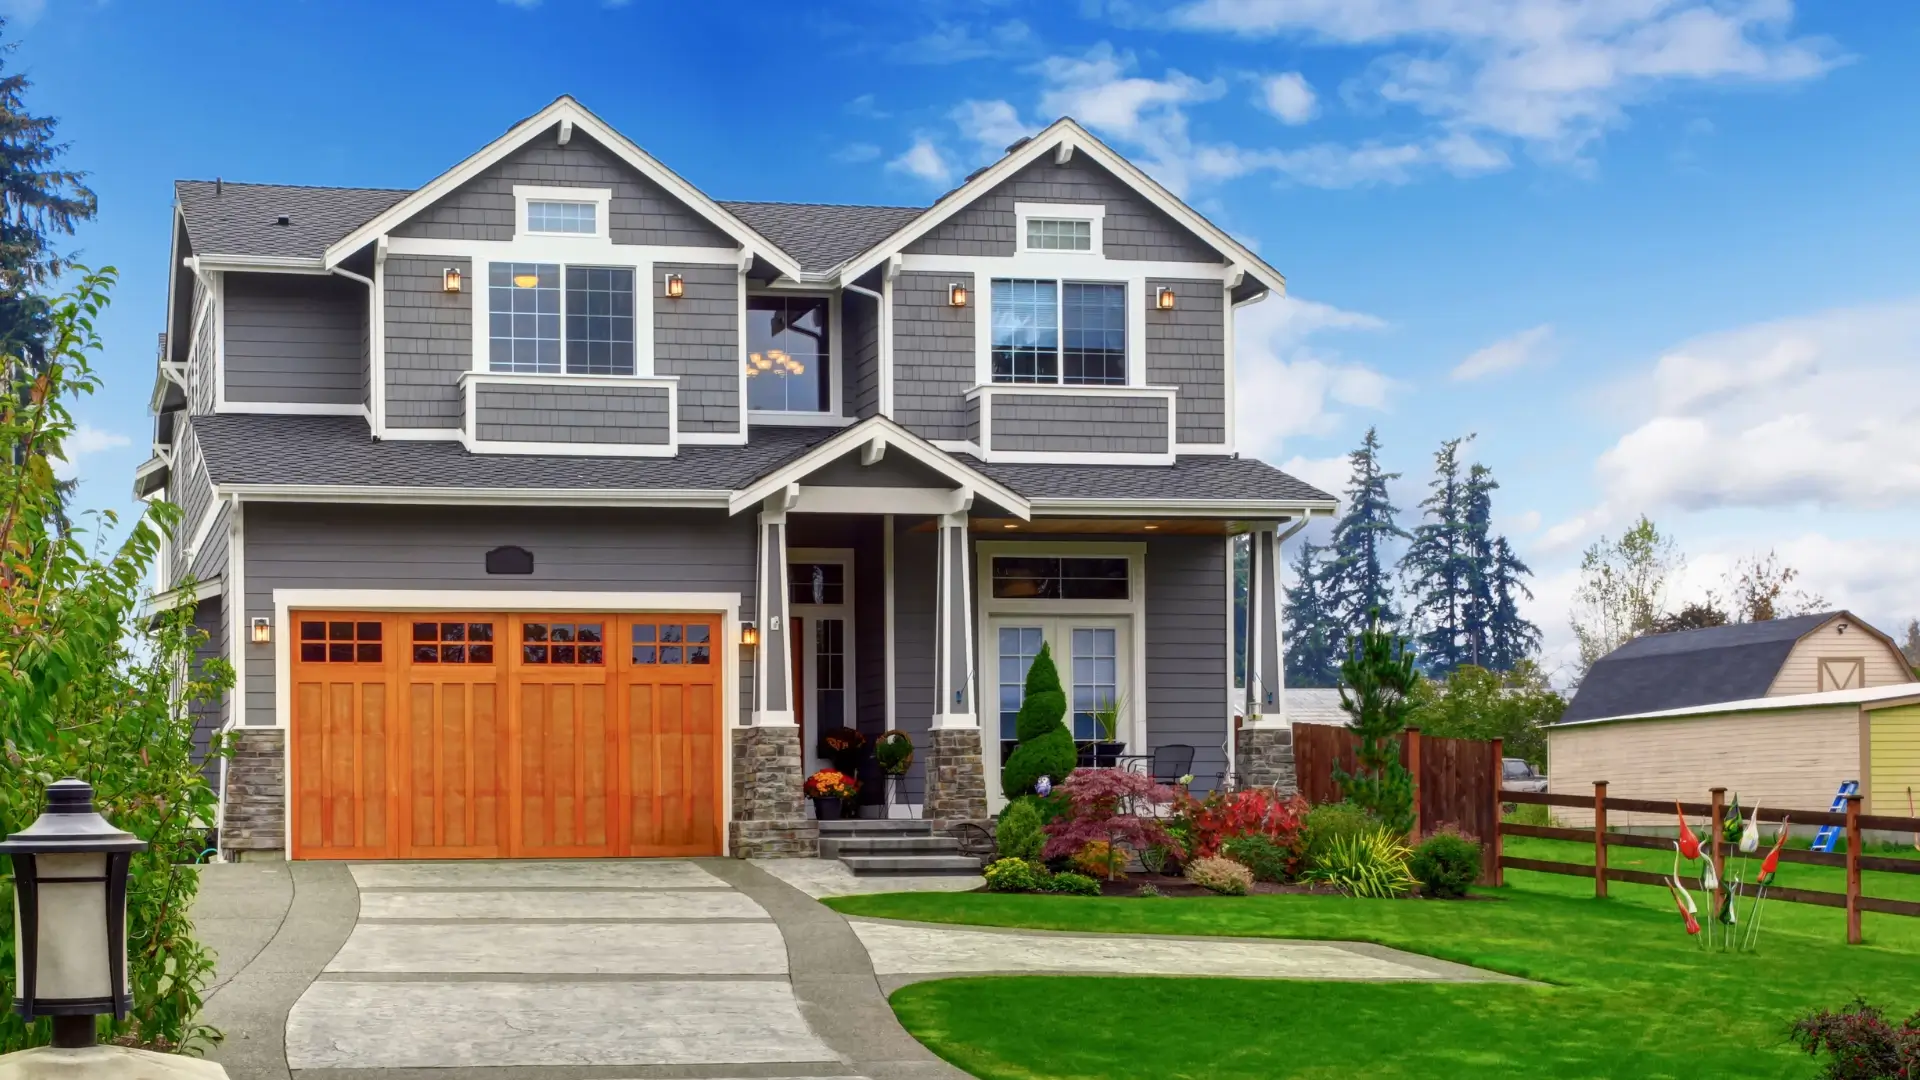 Summer Home Maintenance Tips to Keep Your Home in Great Shape